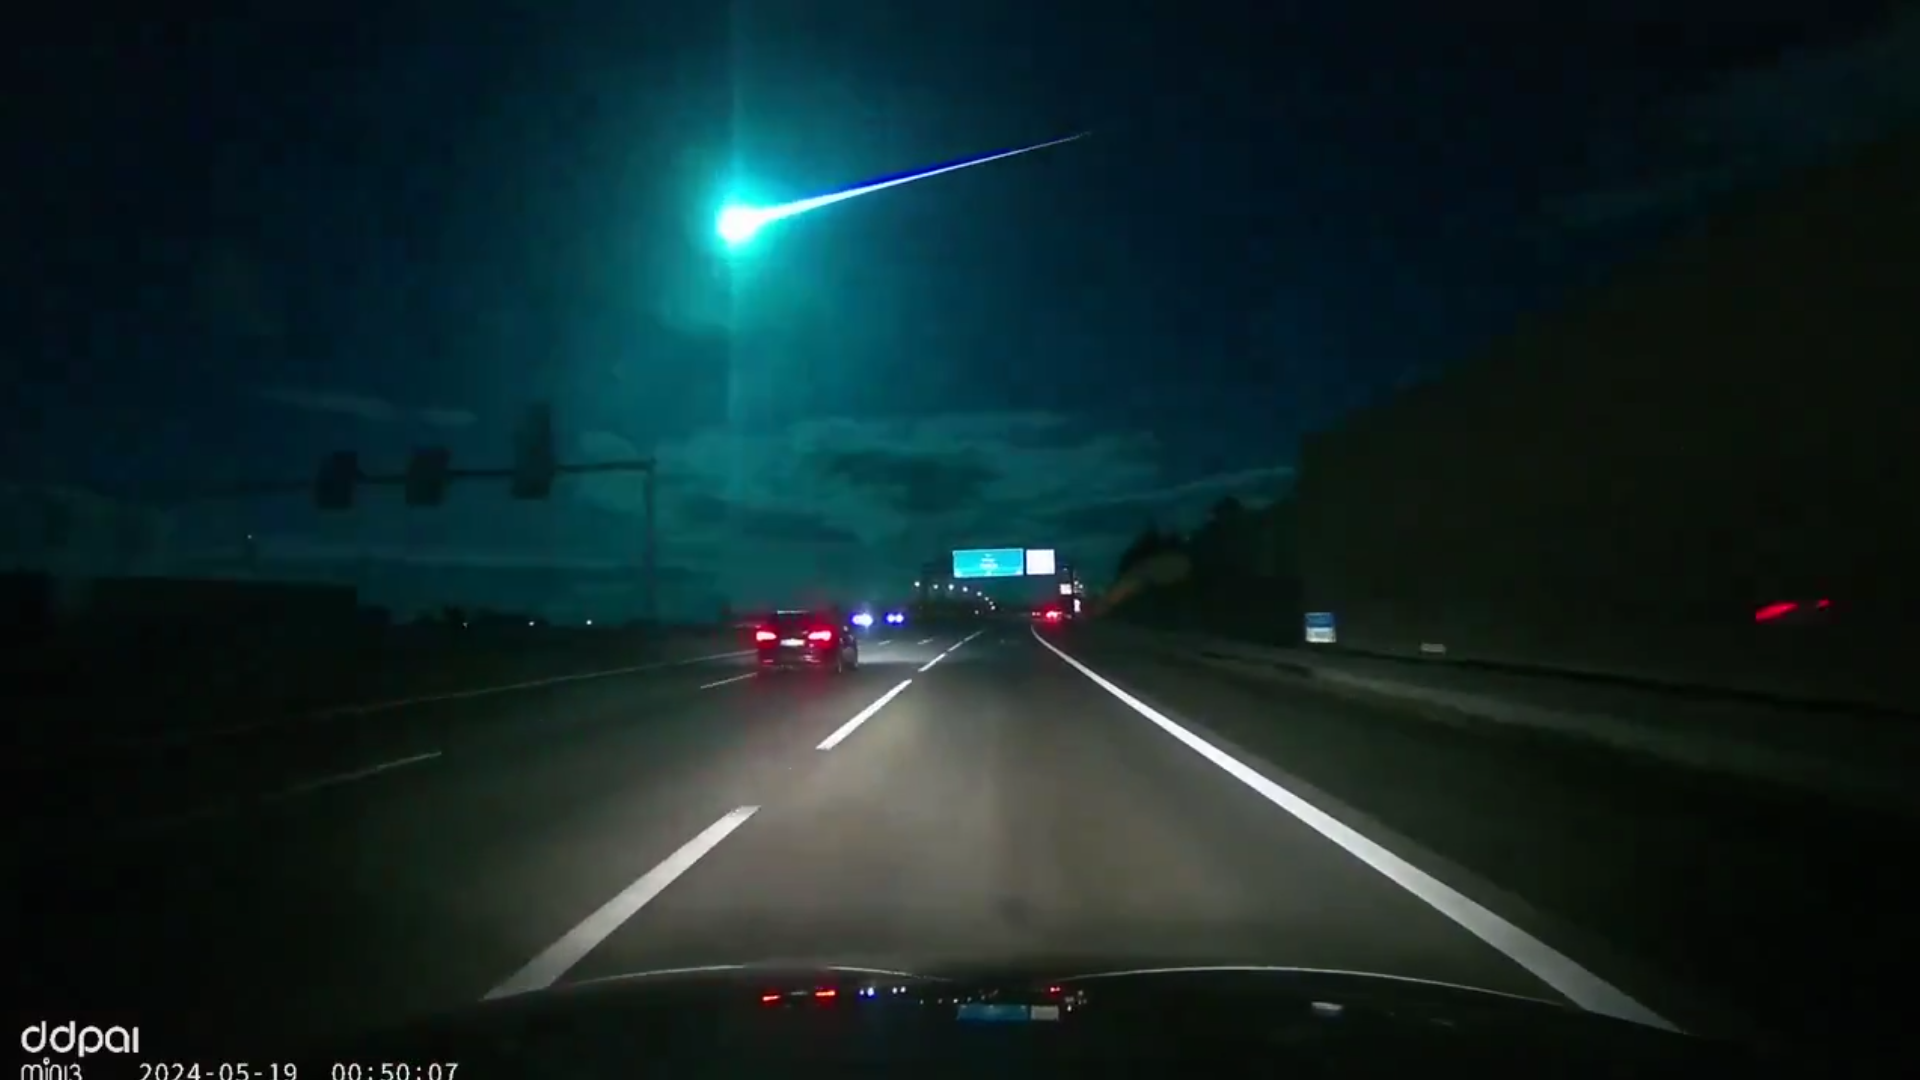 WATCH: Huge fireball ‘meteor’ is spotted in the skies above Spain and Portugal after entering the atmosphere at 160,000km/hr – so did YOU see it? [Video]